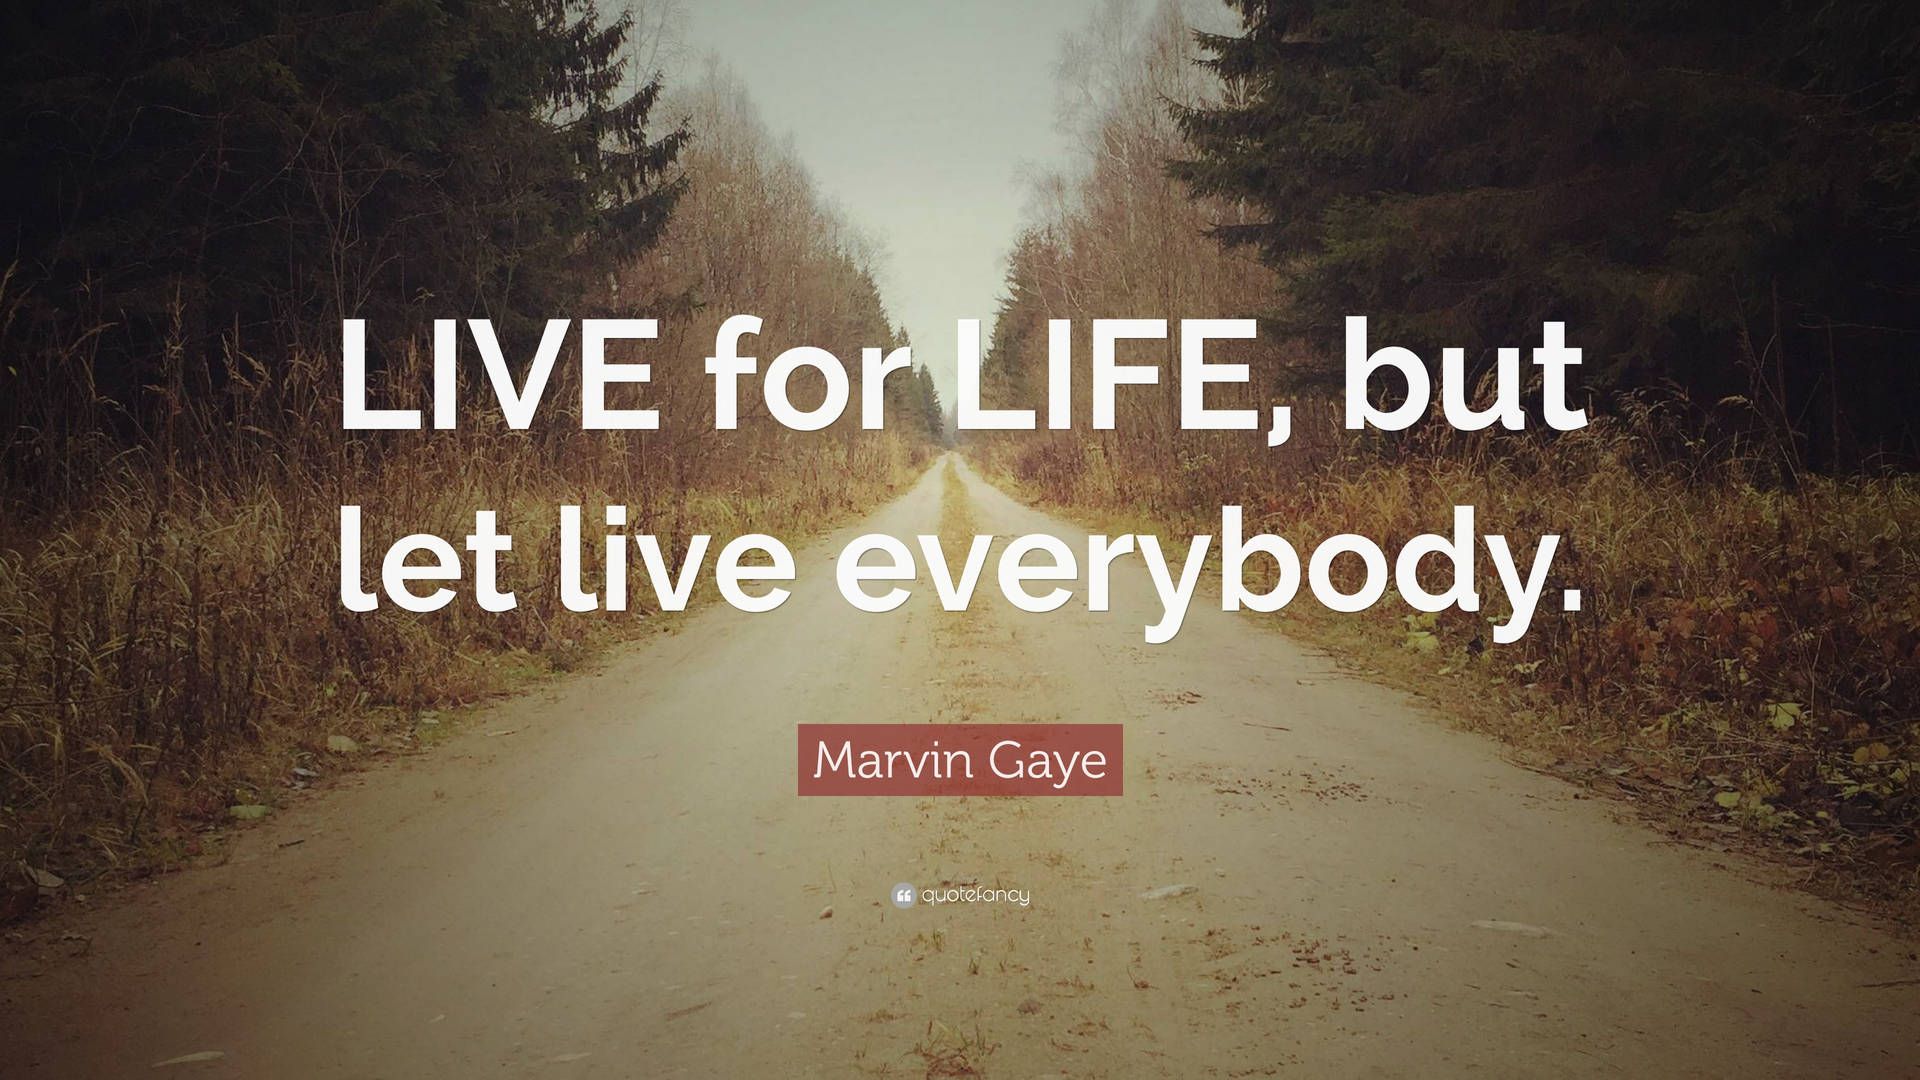 Marvingaye Live For Life Quote: Marvin Gayes Citat 